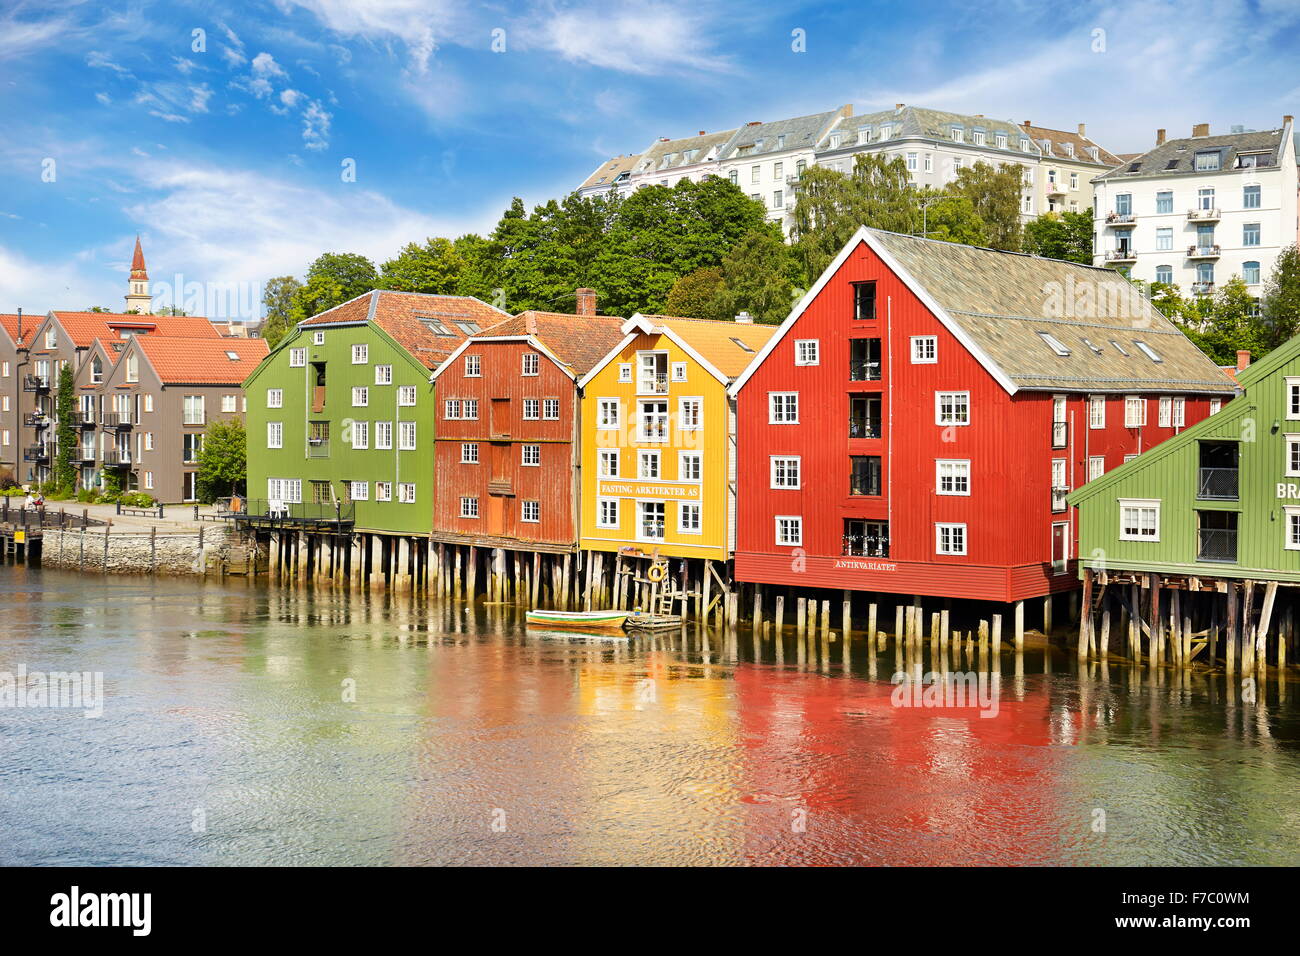 Colorful historic stilt houses in Trondheim, Norway Stock Photo